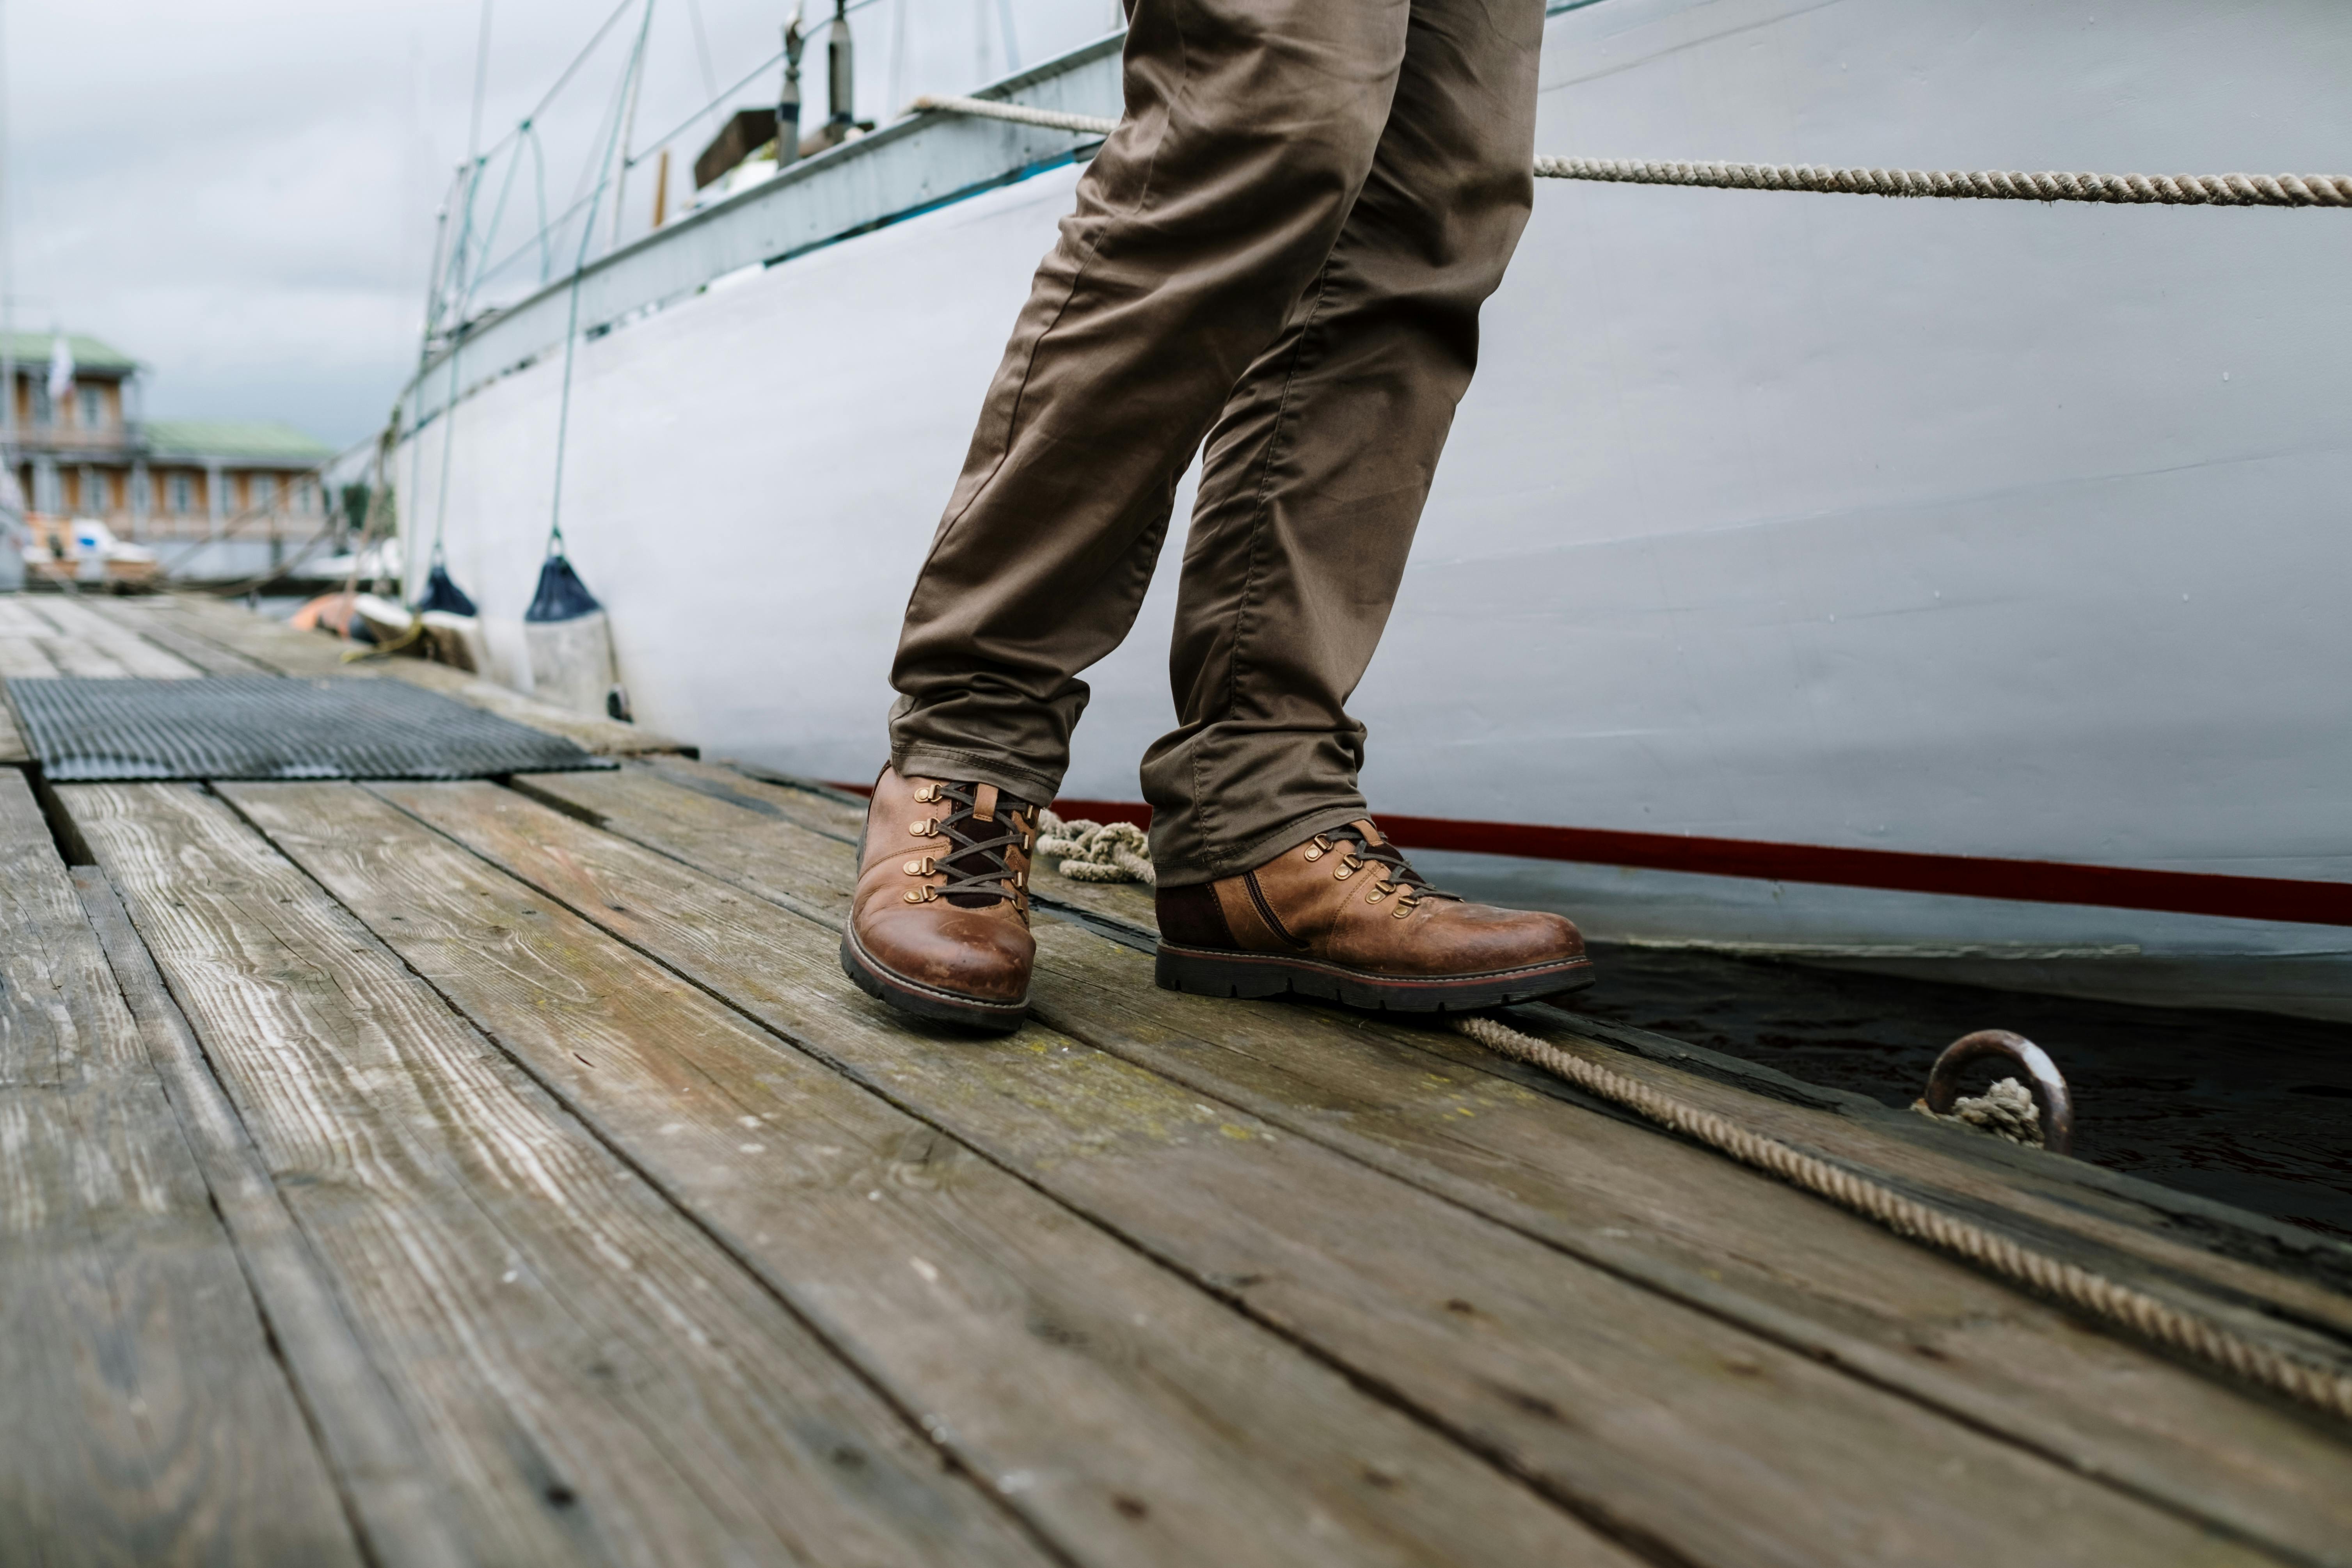 A person with black and white shoes standing on a dock photo  Free Shoe  Image on Unsplash